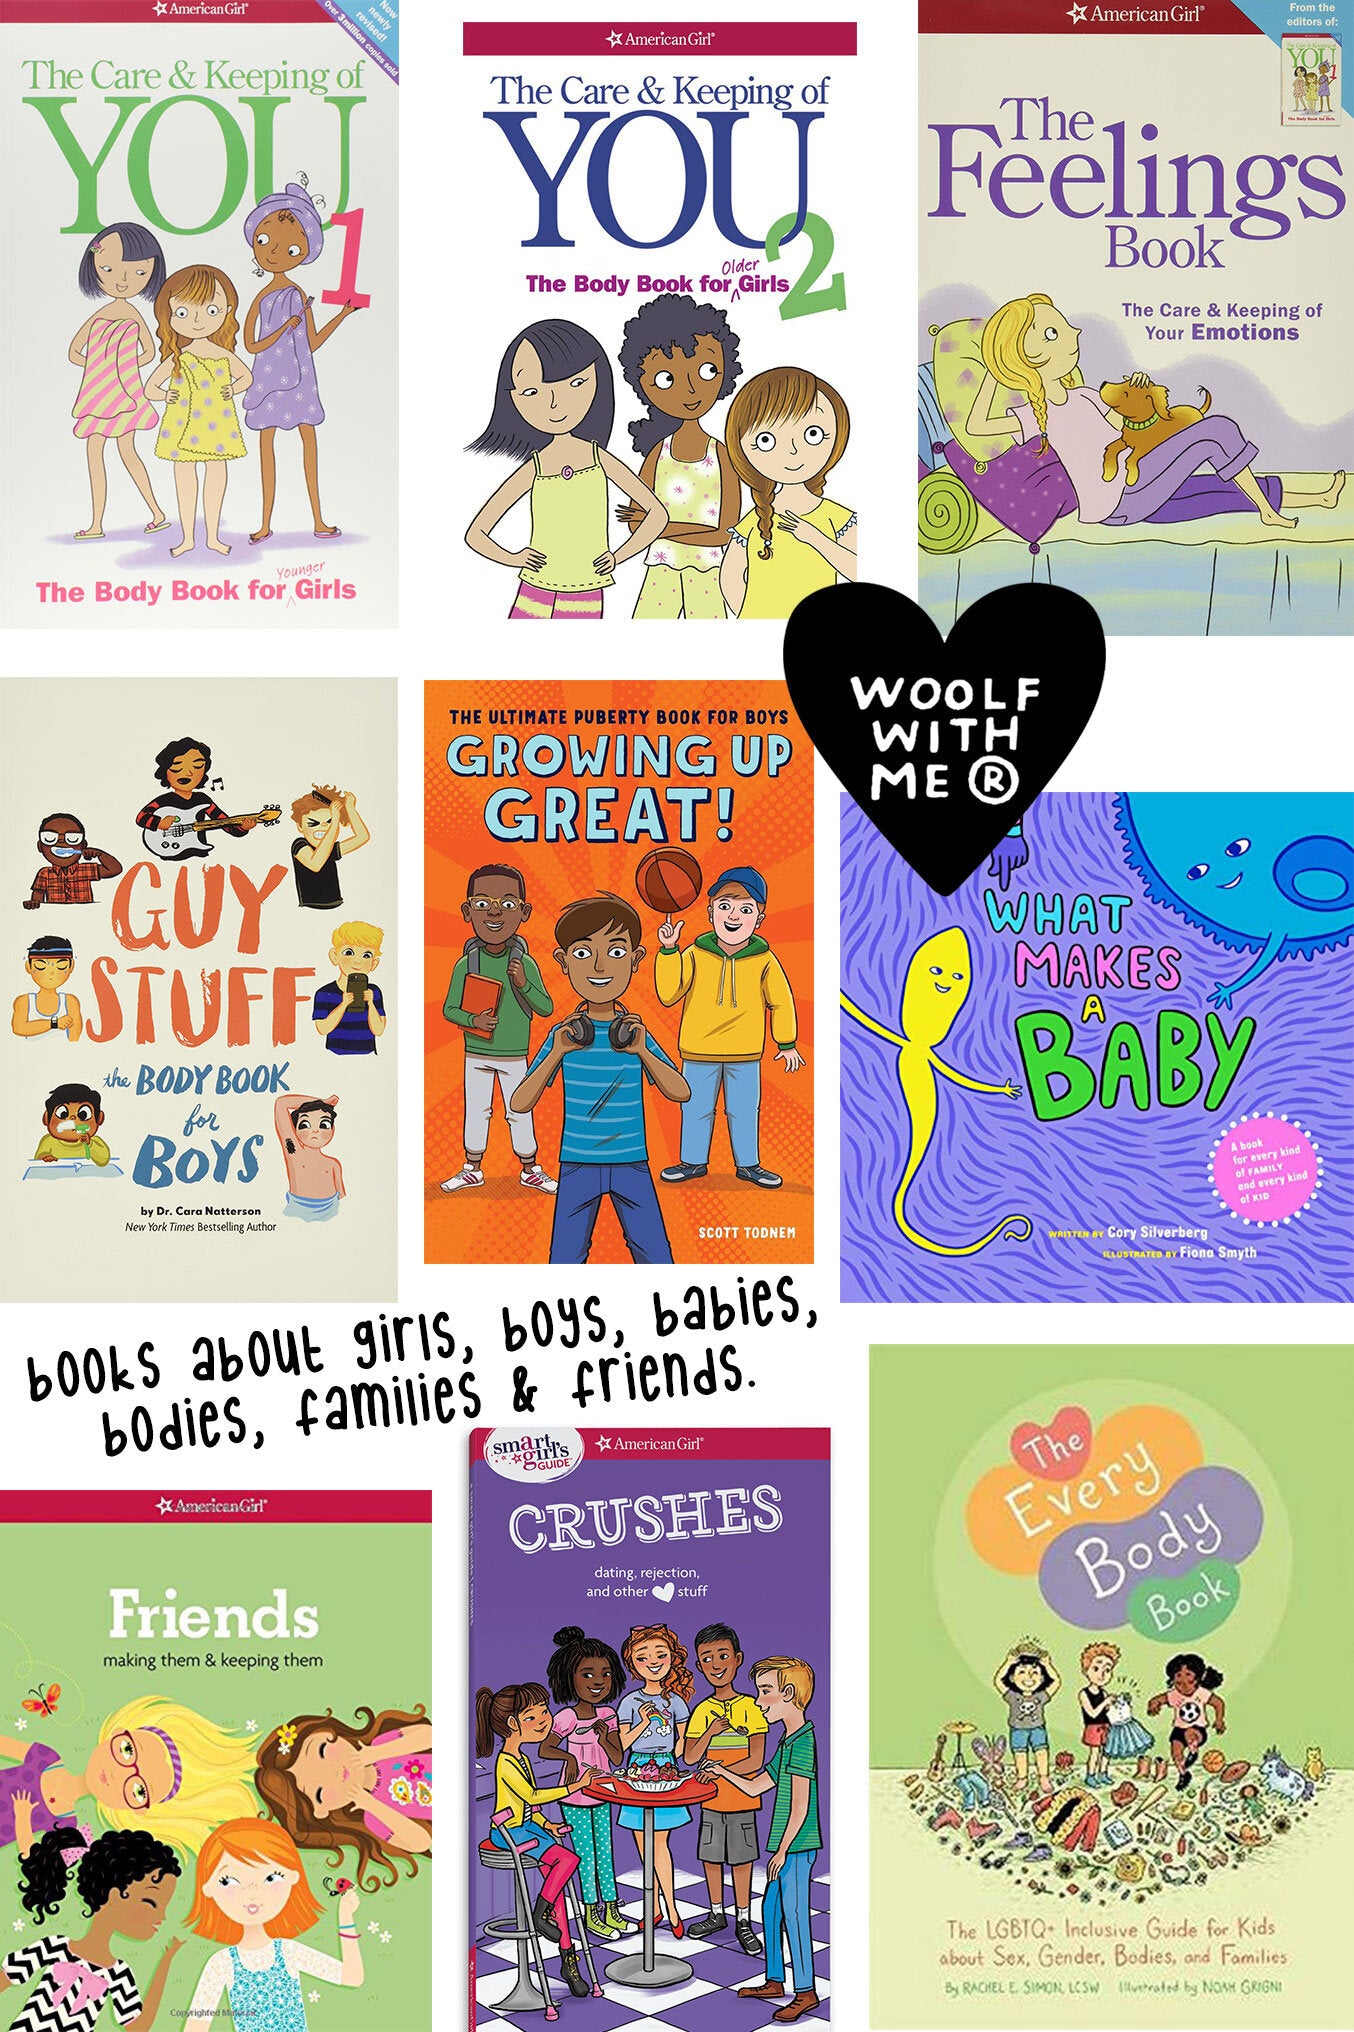 Recommended Books about Girls, Boys, Babies, Bodies, Families & Friends.